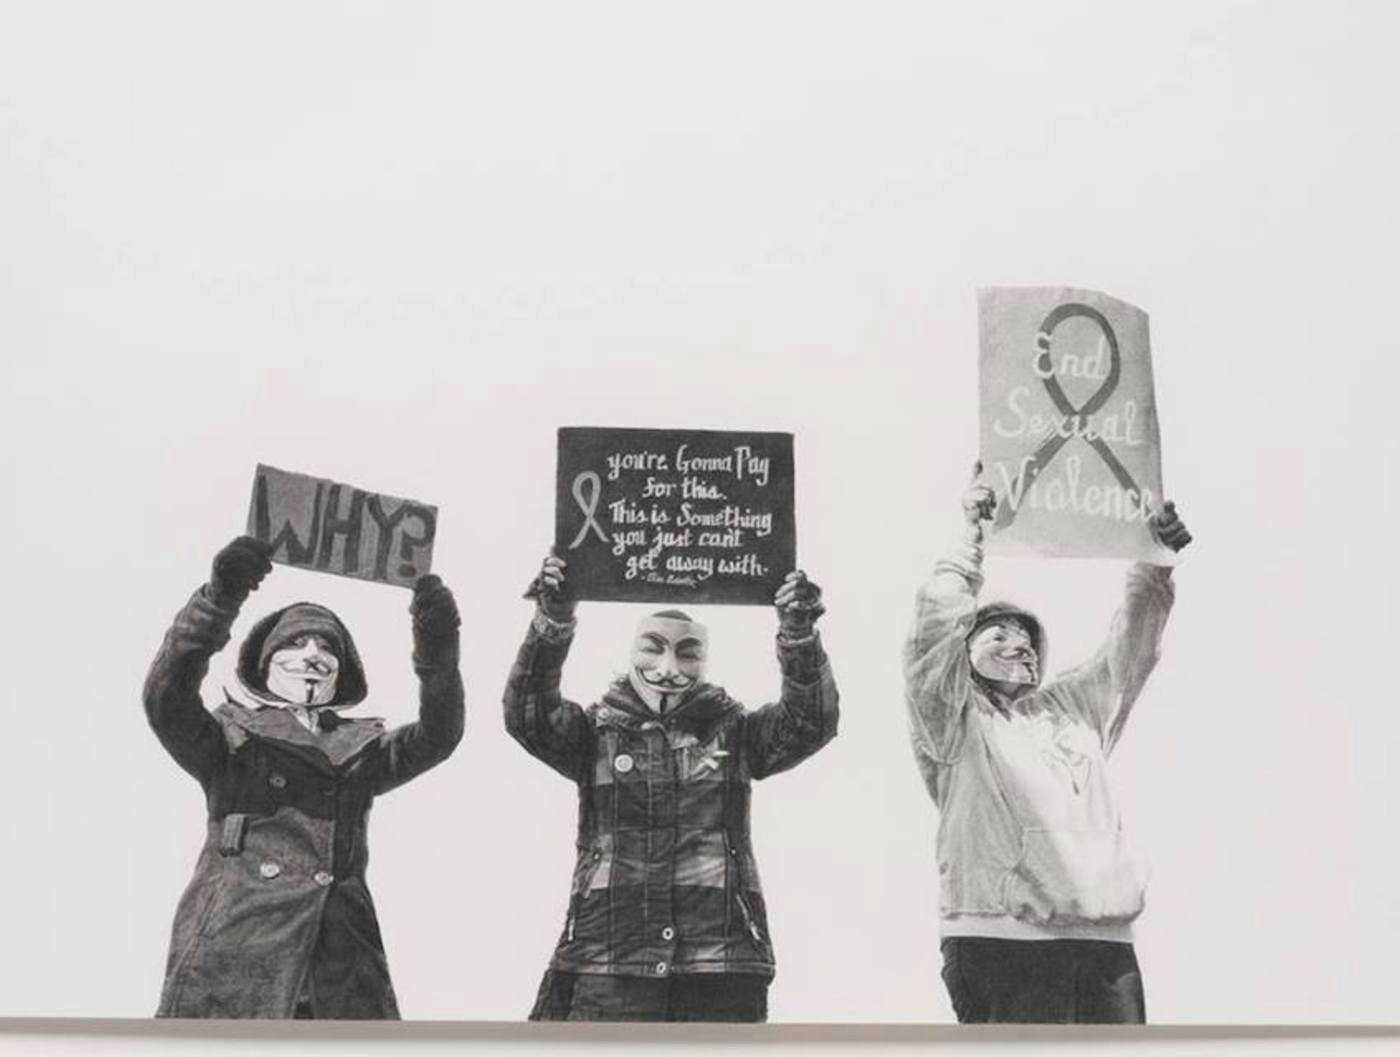 The Art of Activism: A Panel Discussion Inspired by the work of Andrea Bowers